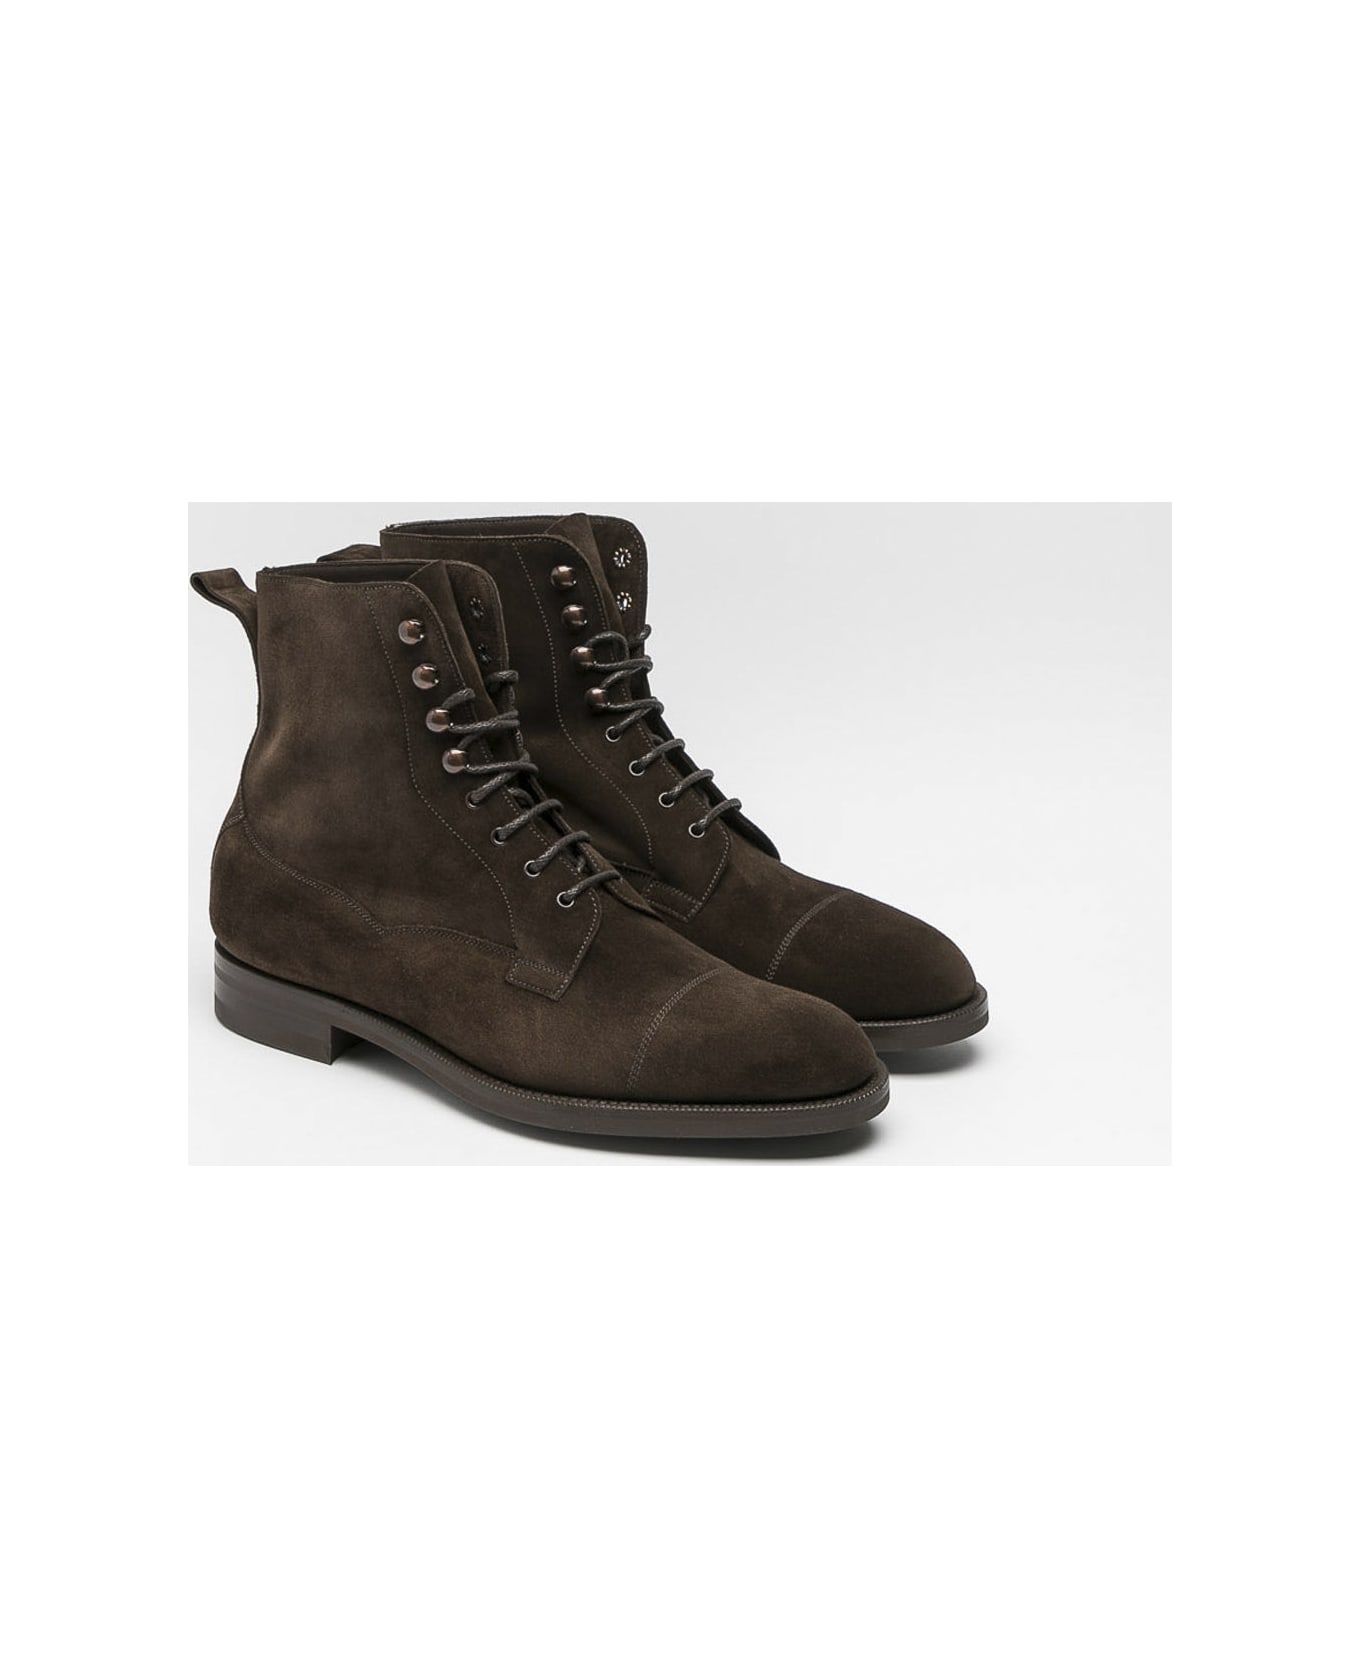 Edward Green Galway Mocca Suede Derby Boot - Marrone ブーツ